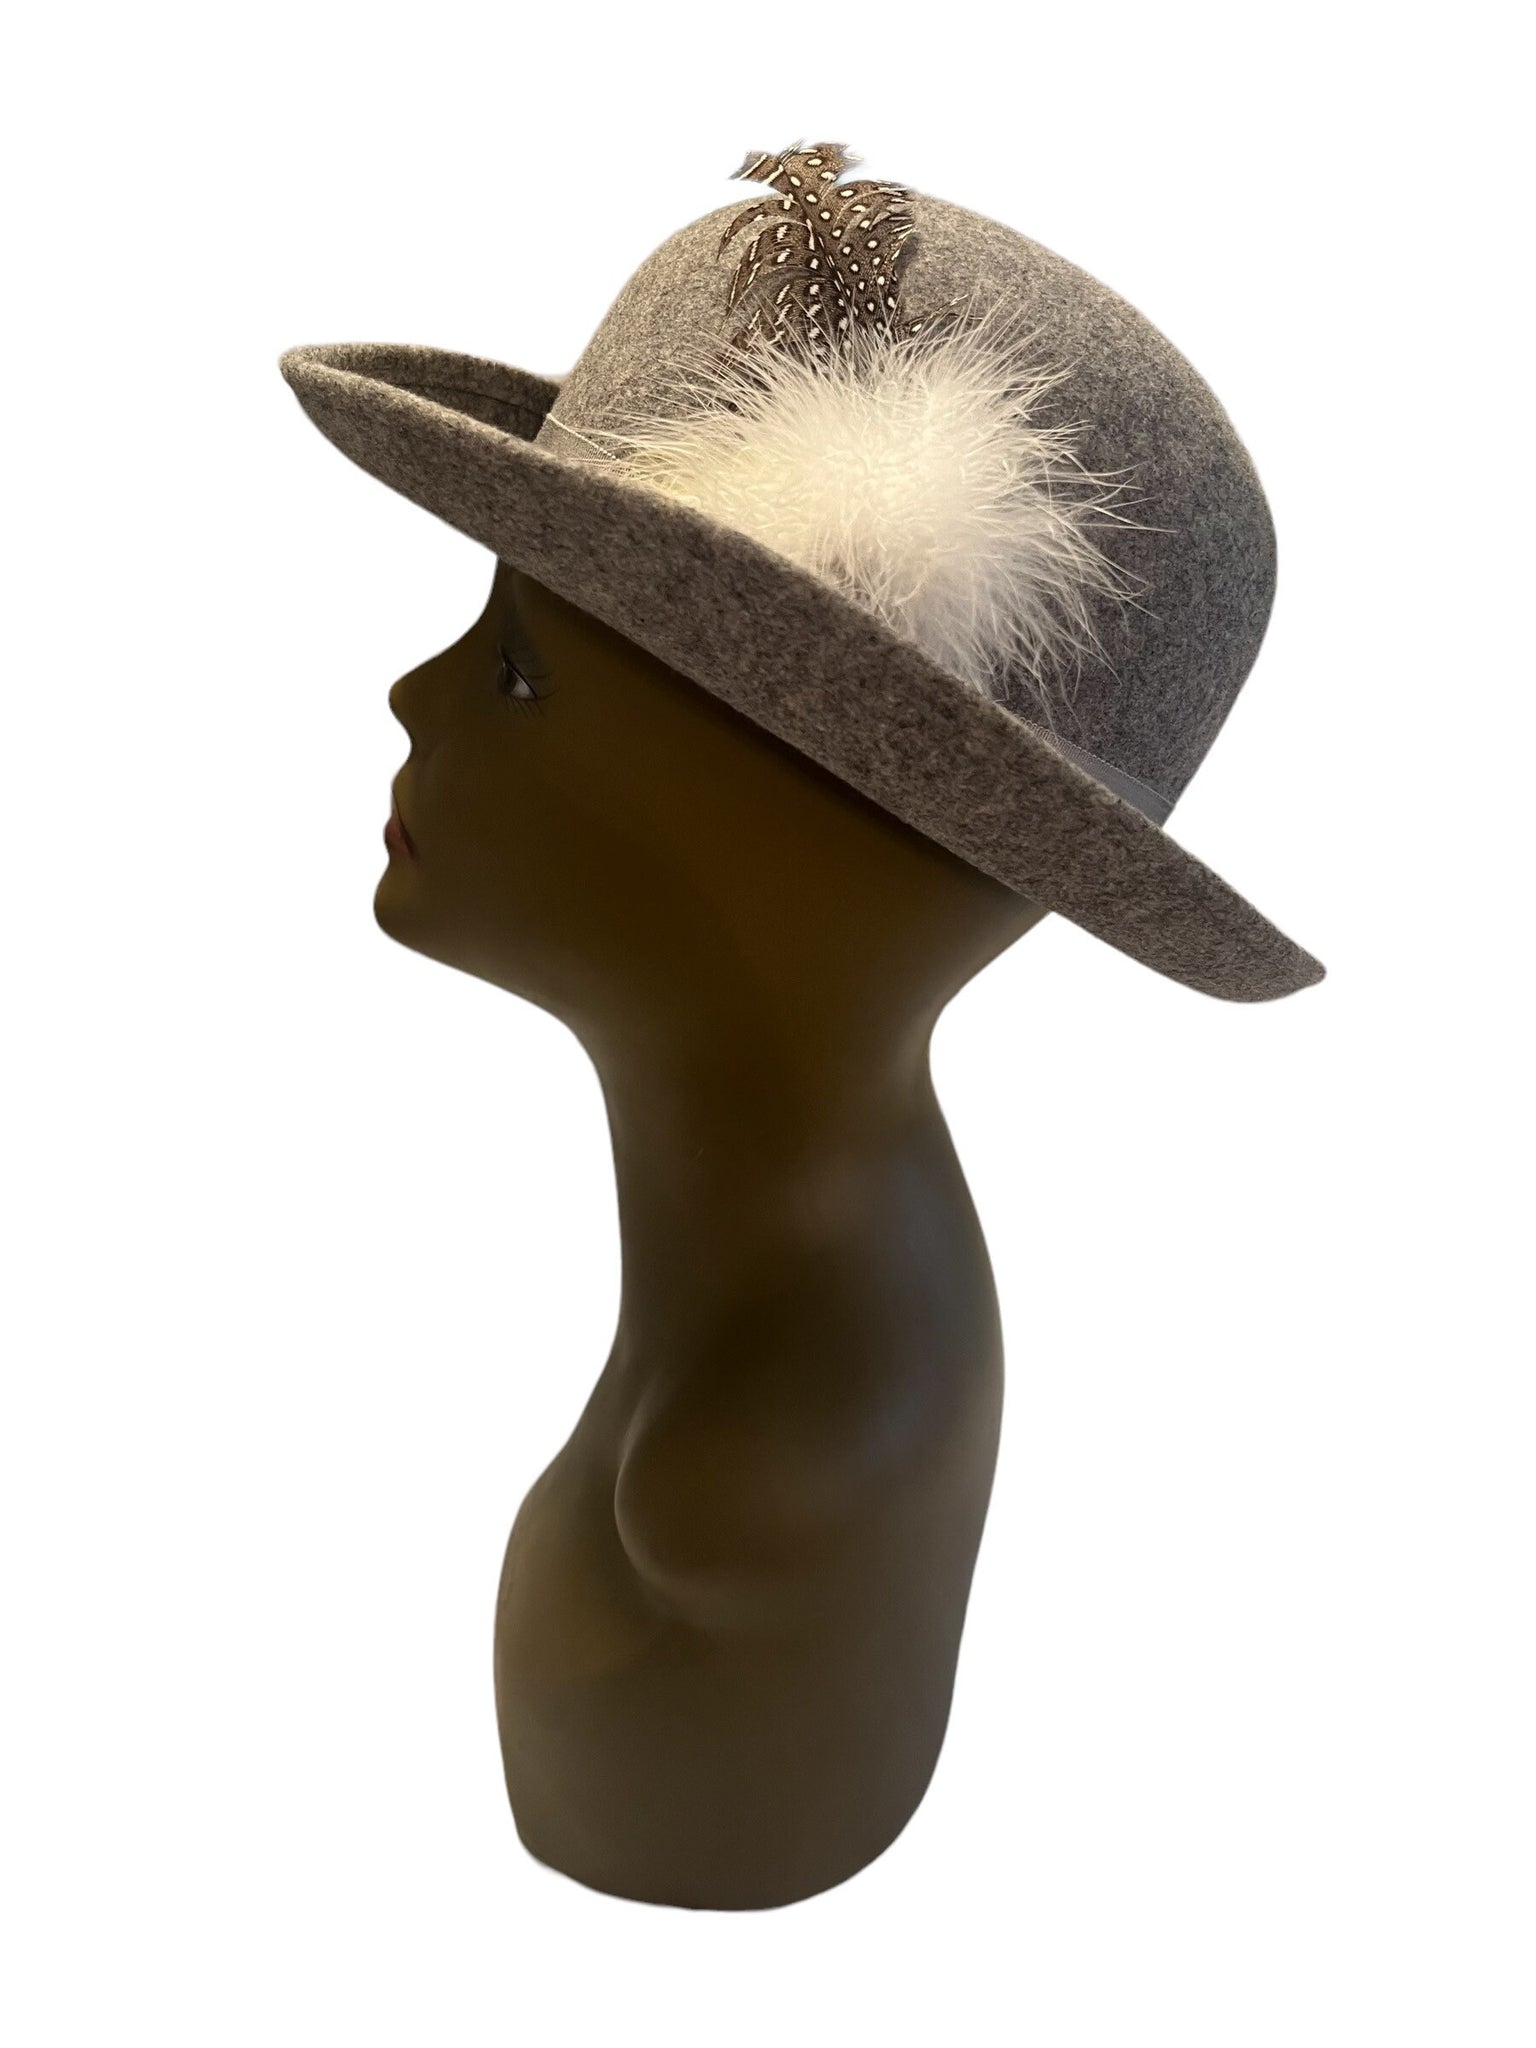 Vintage 60's doeskin wool gray hat with feather